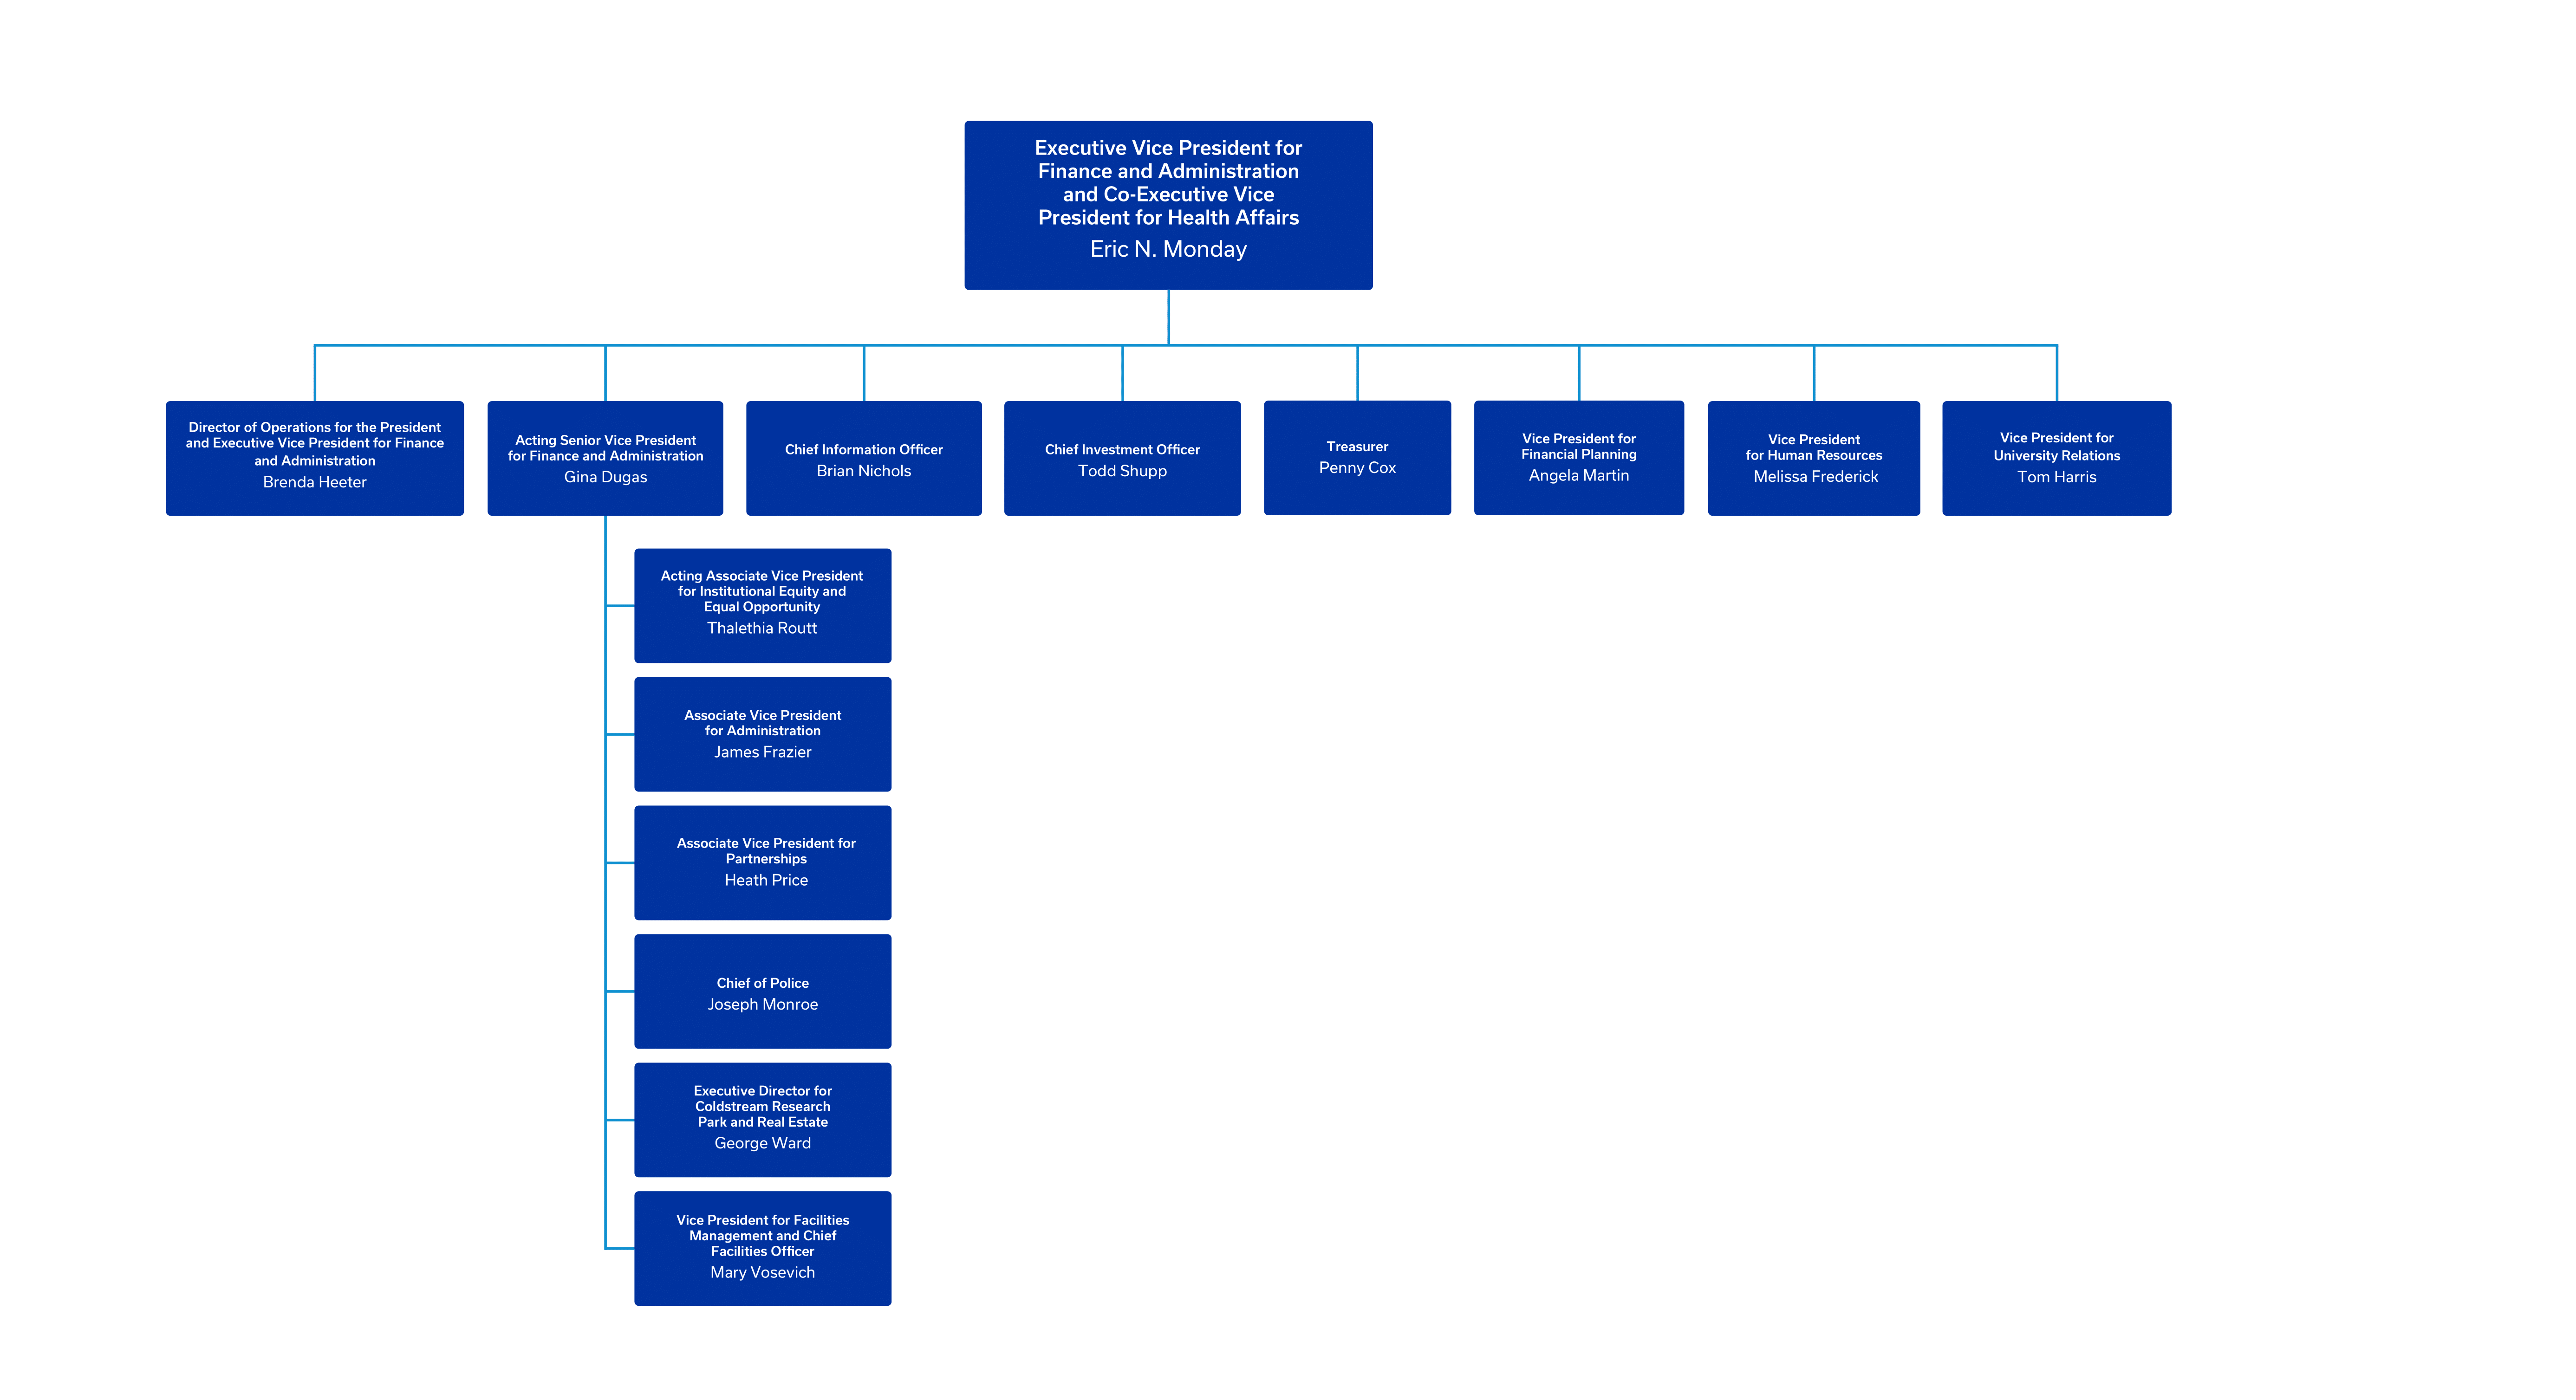 This is a photo of the organizational chart for the EVPFA office.